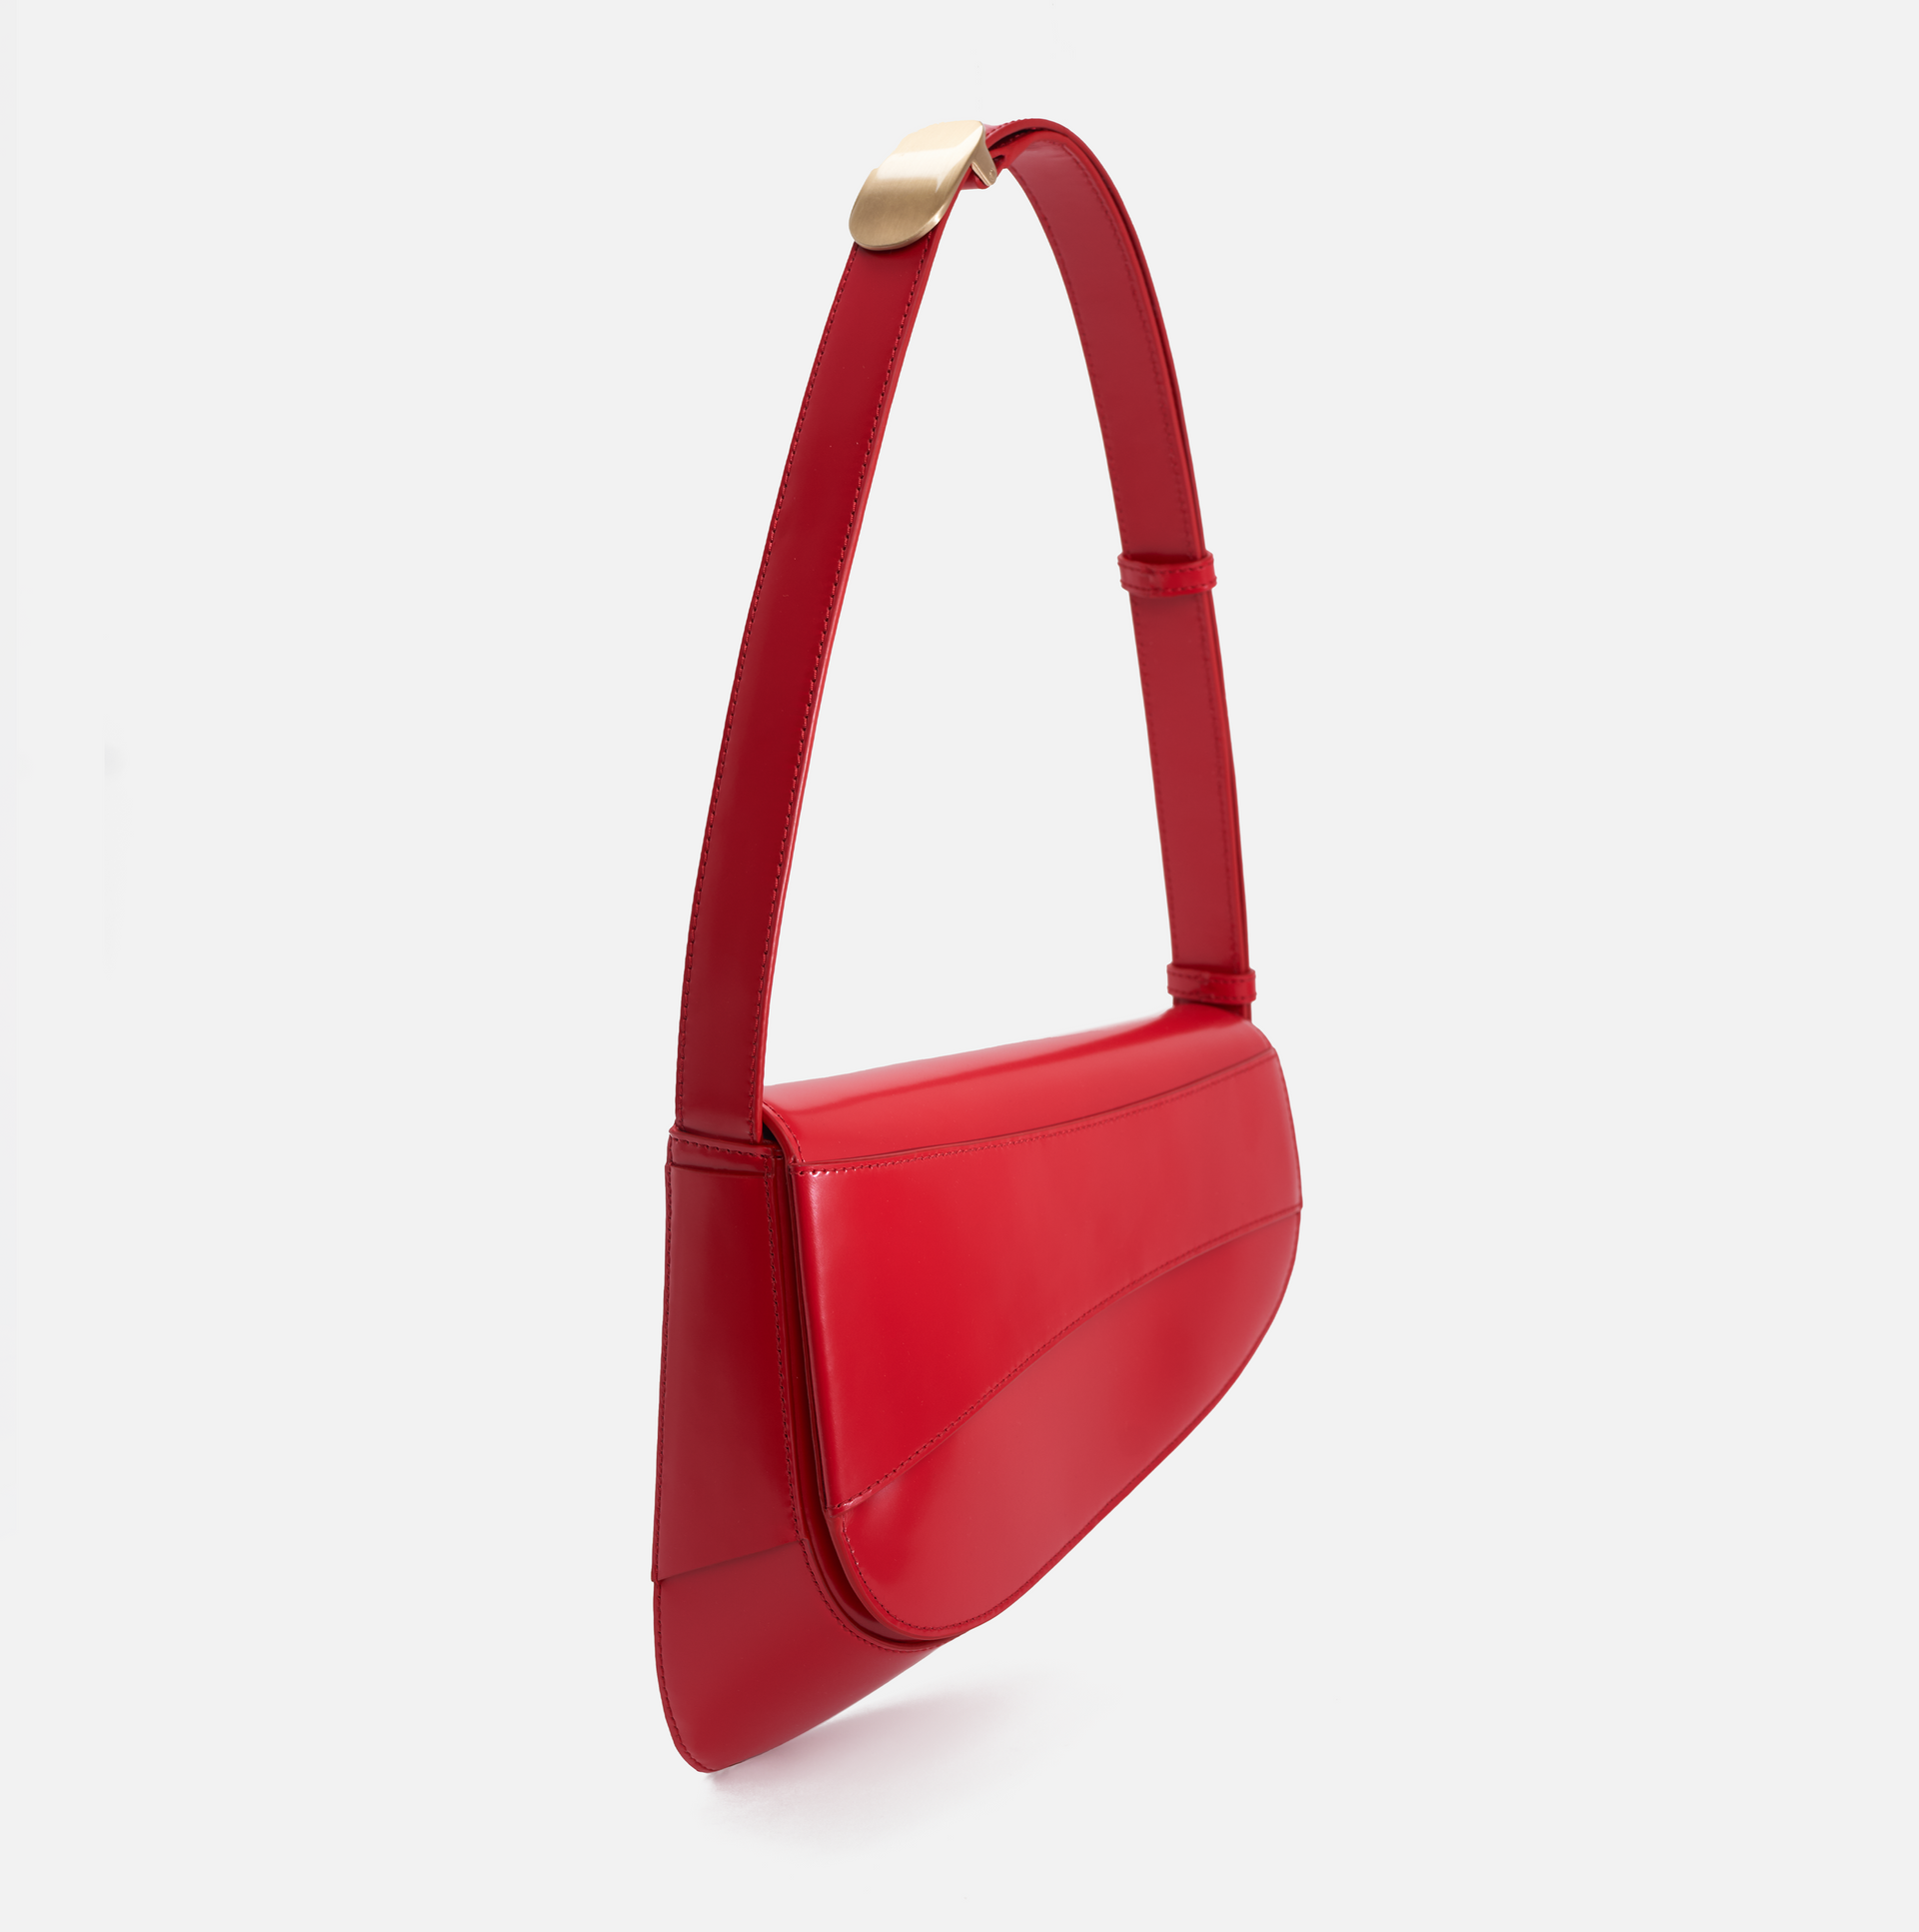 Women's Shoulder Bag Made of Grain Leather with Long Leather Shoulder Strap - Red